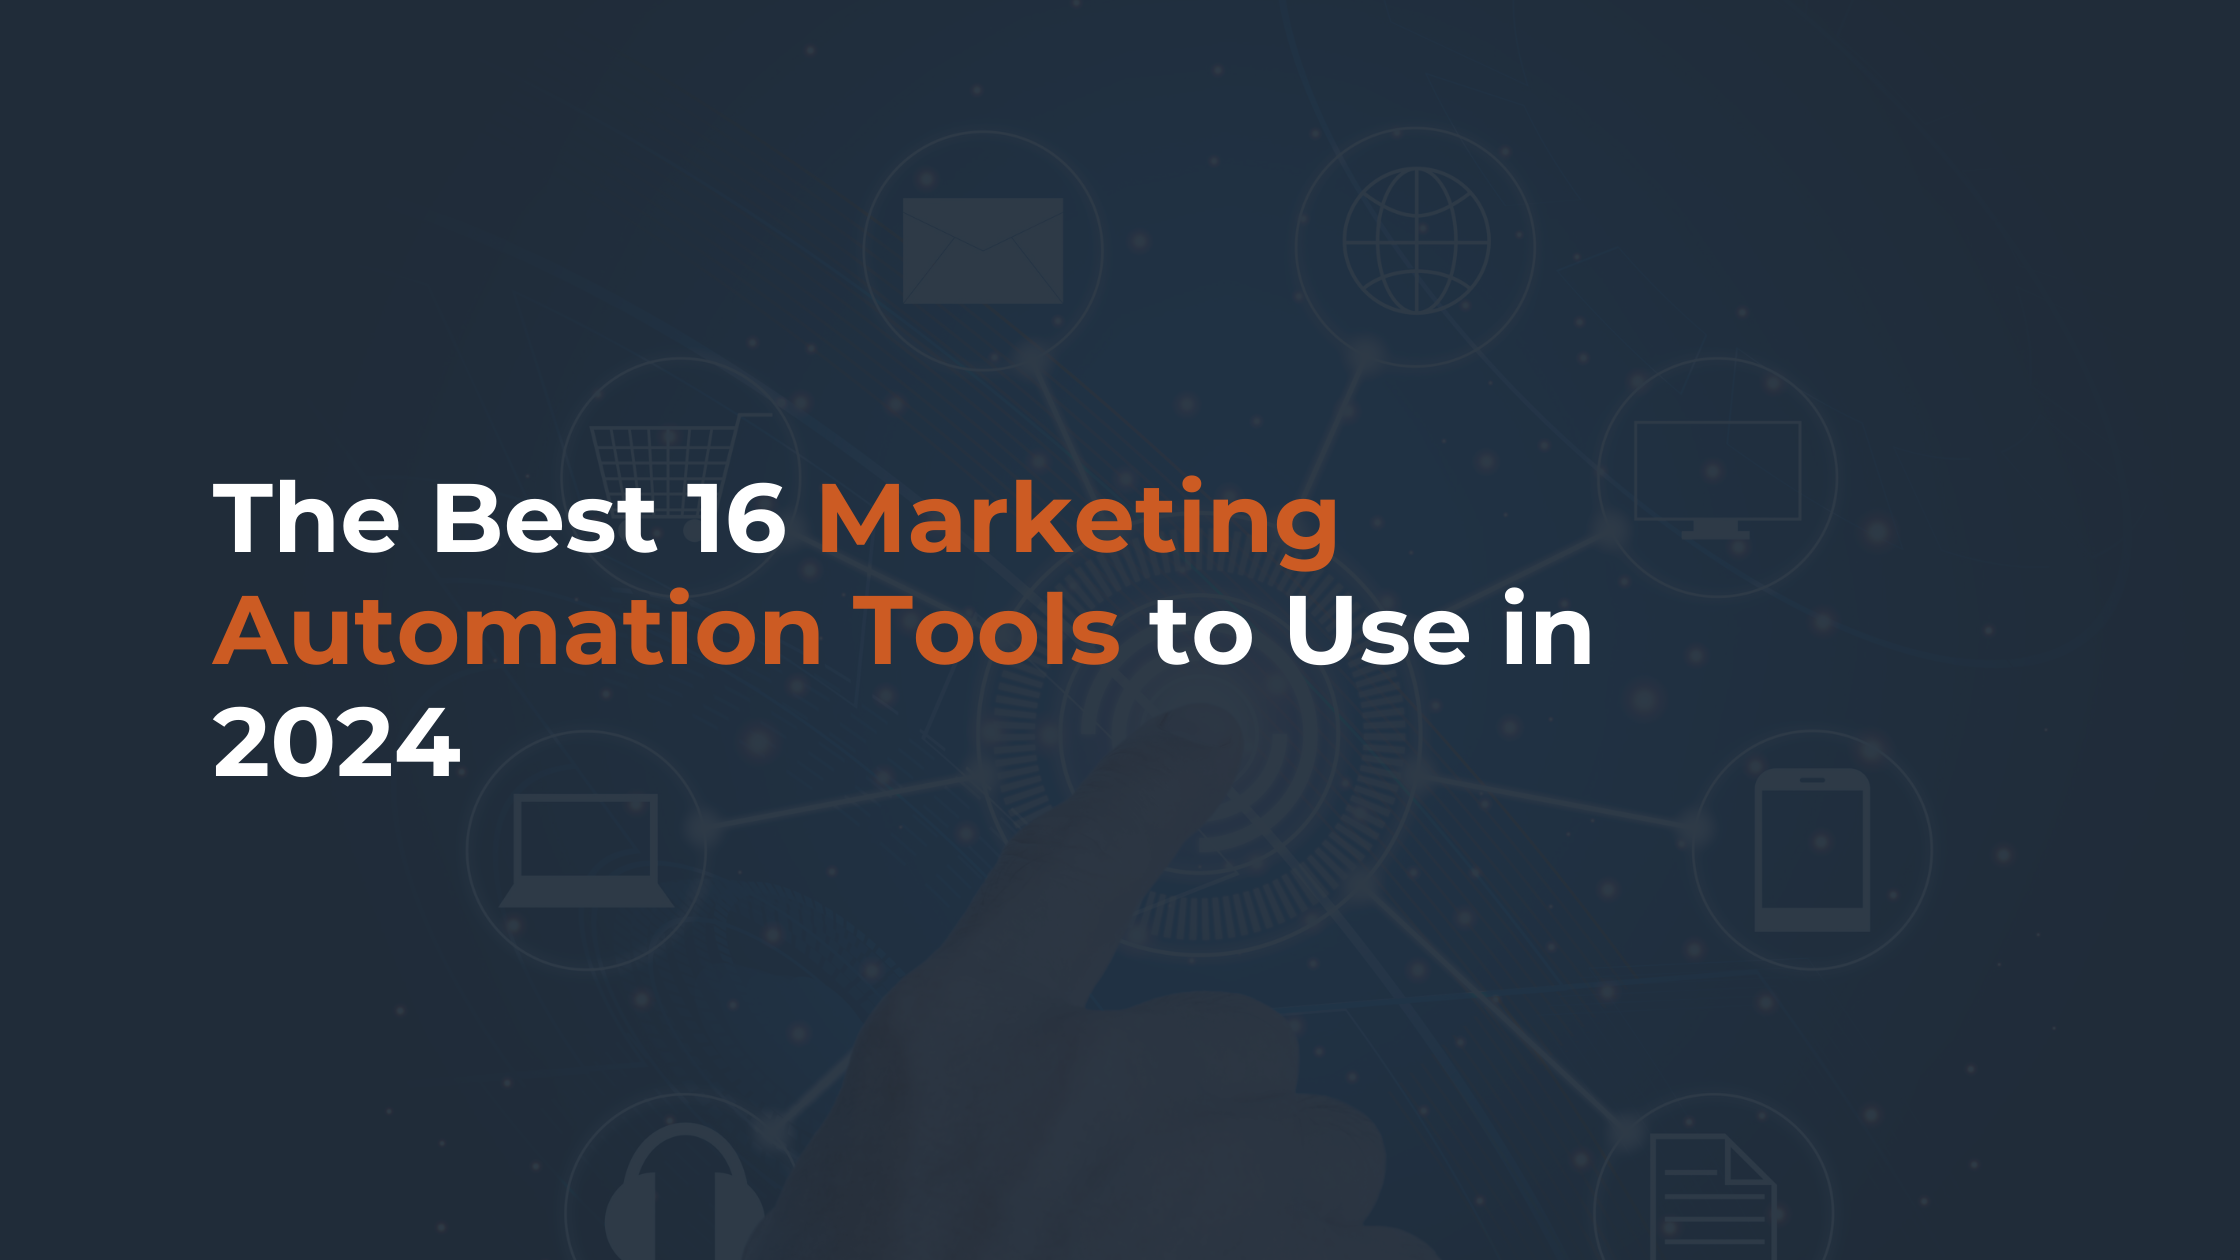 The Best 16 Marketing Automation Tools to Use in 2024